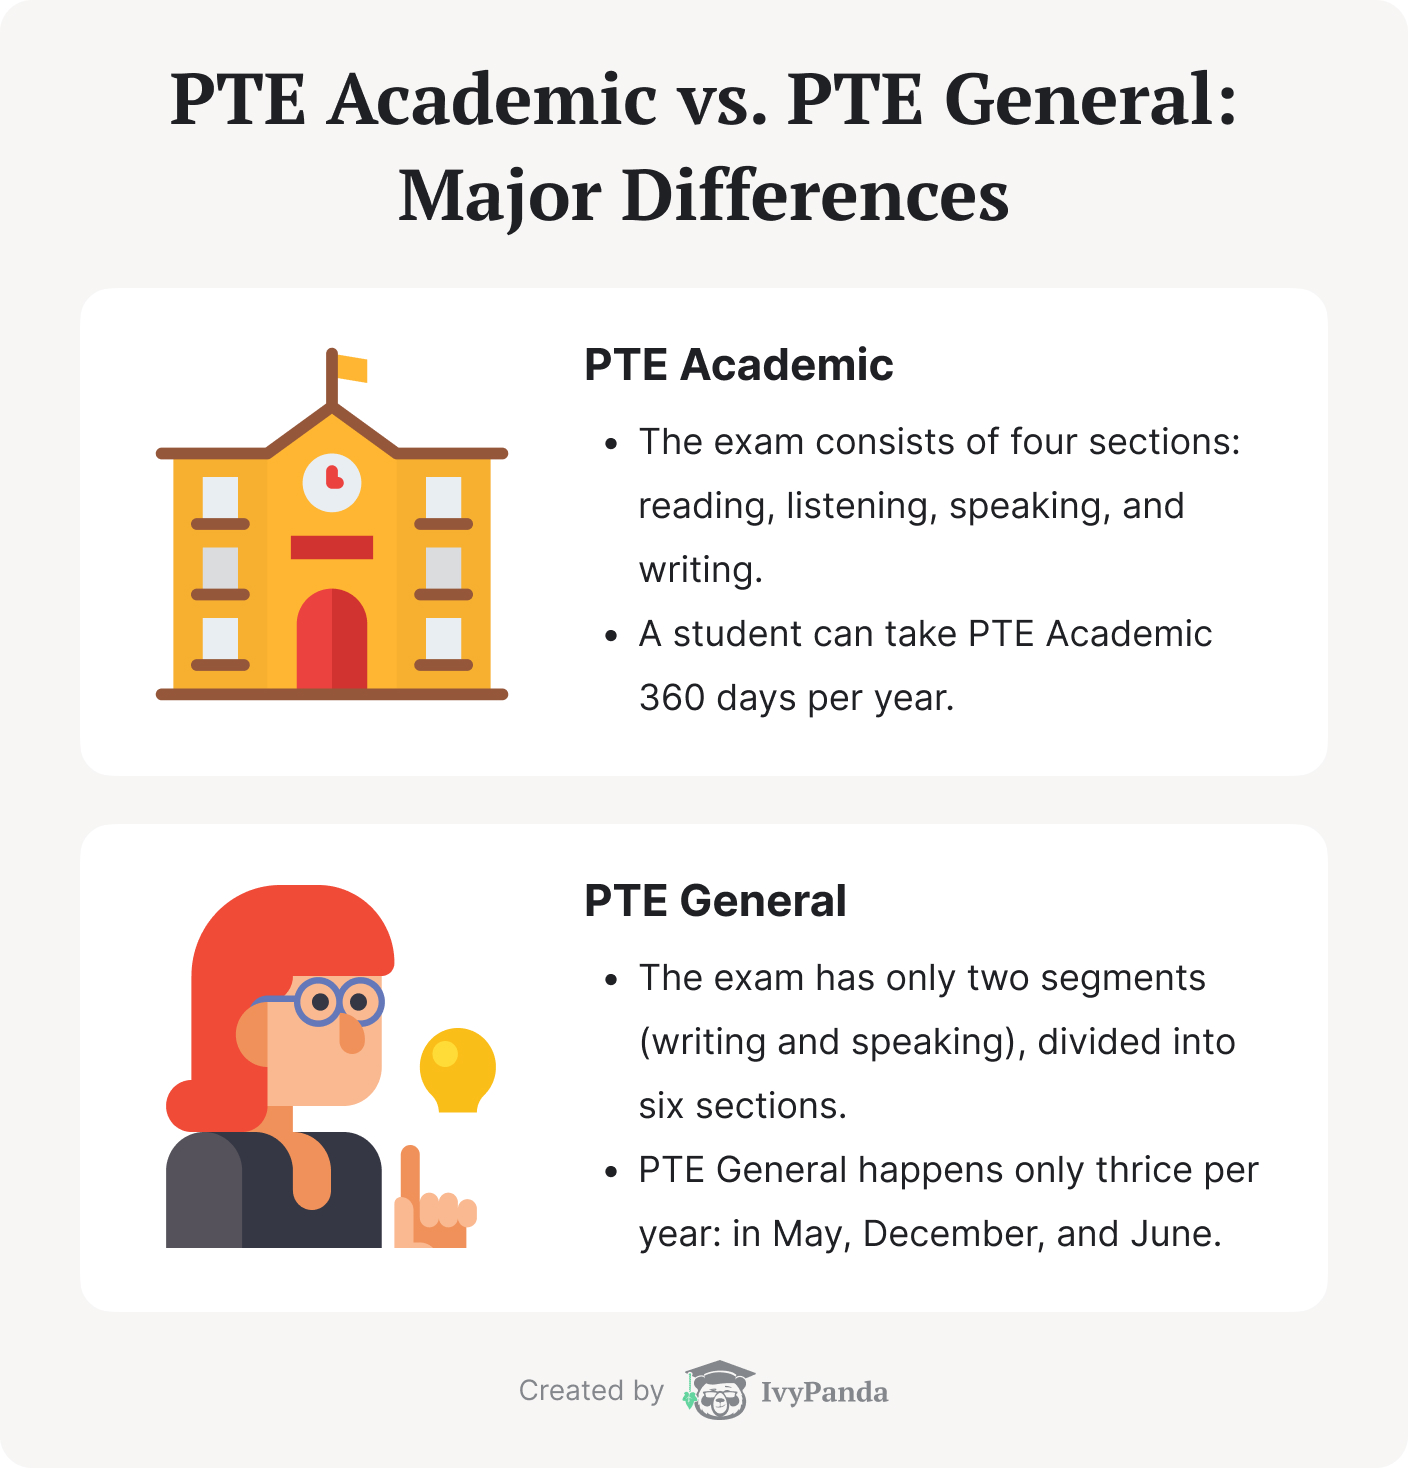 Differences between PTE Academic and PTE General.